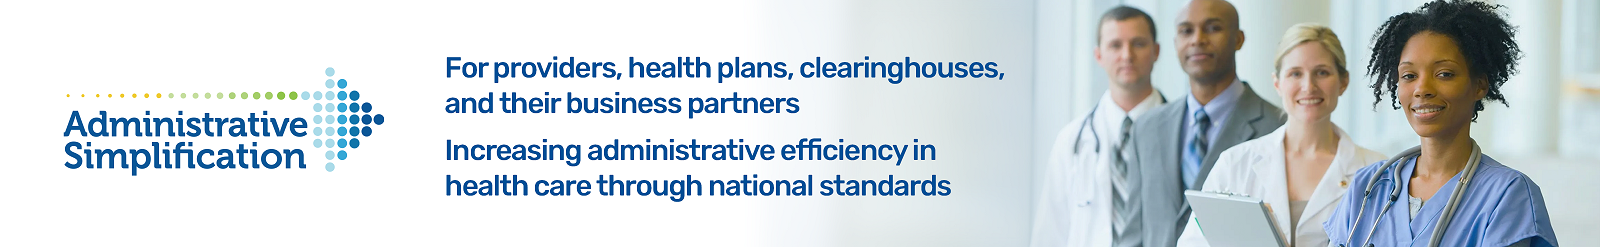 banner with the following text: "for providers, health plans, clearing houses, and their business partners. Increasing administrative efficiency in health care through national standards"